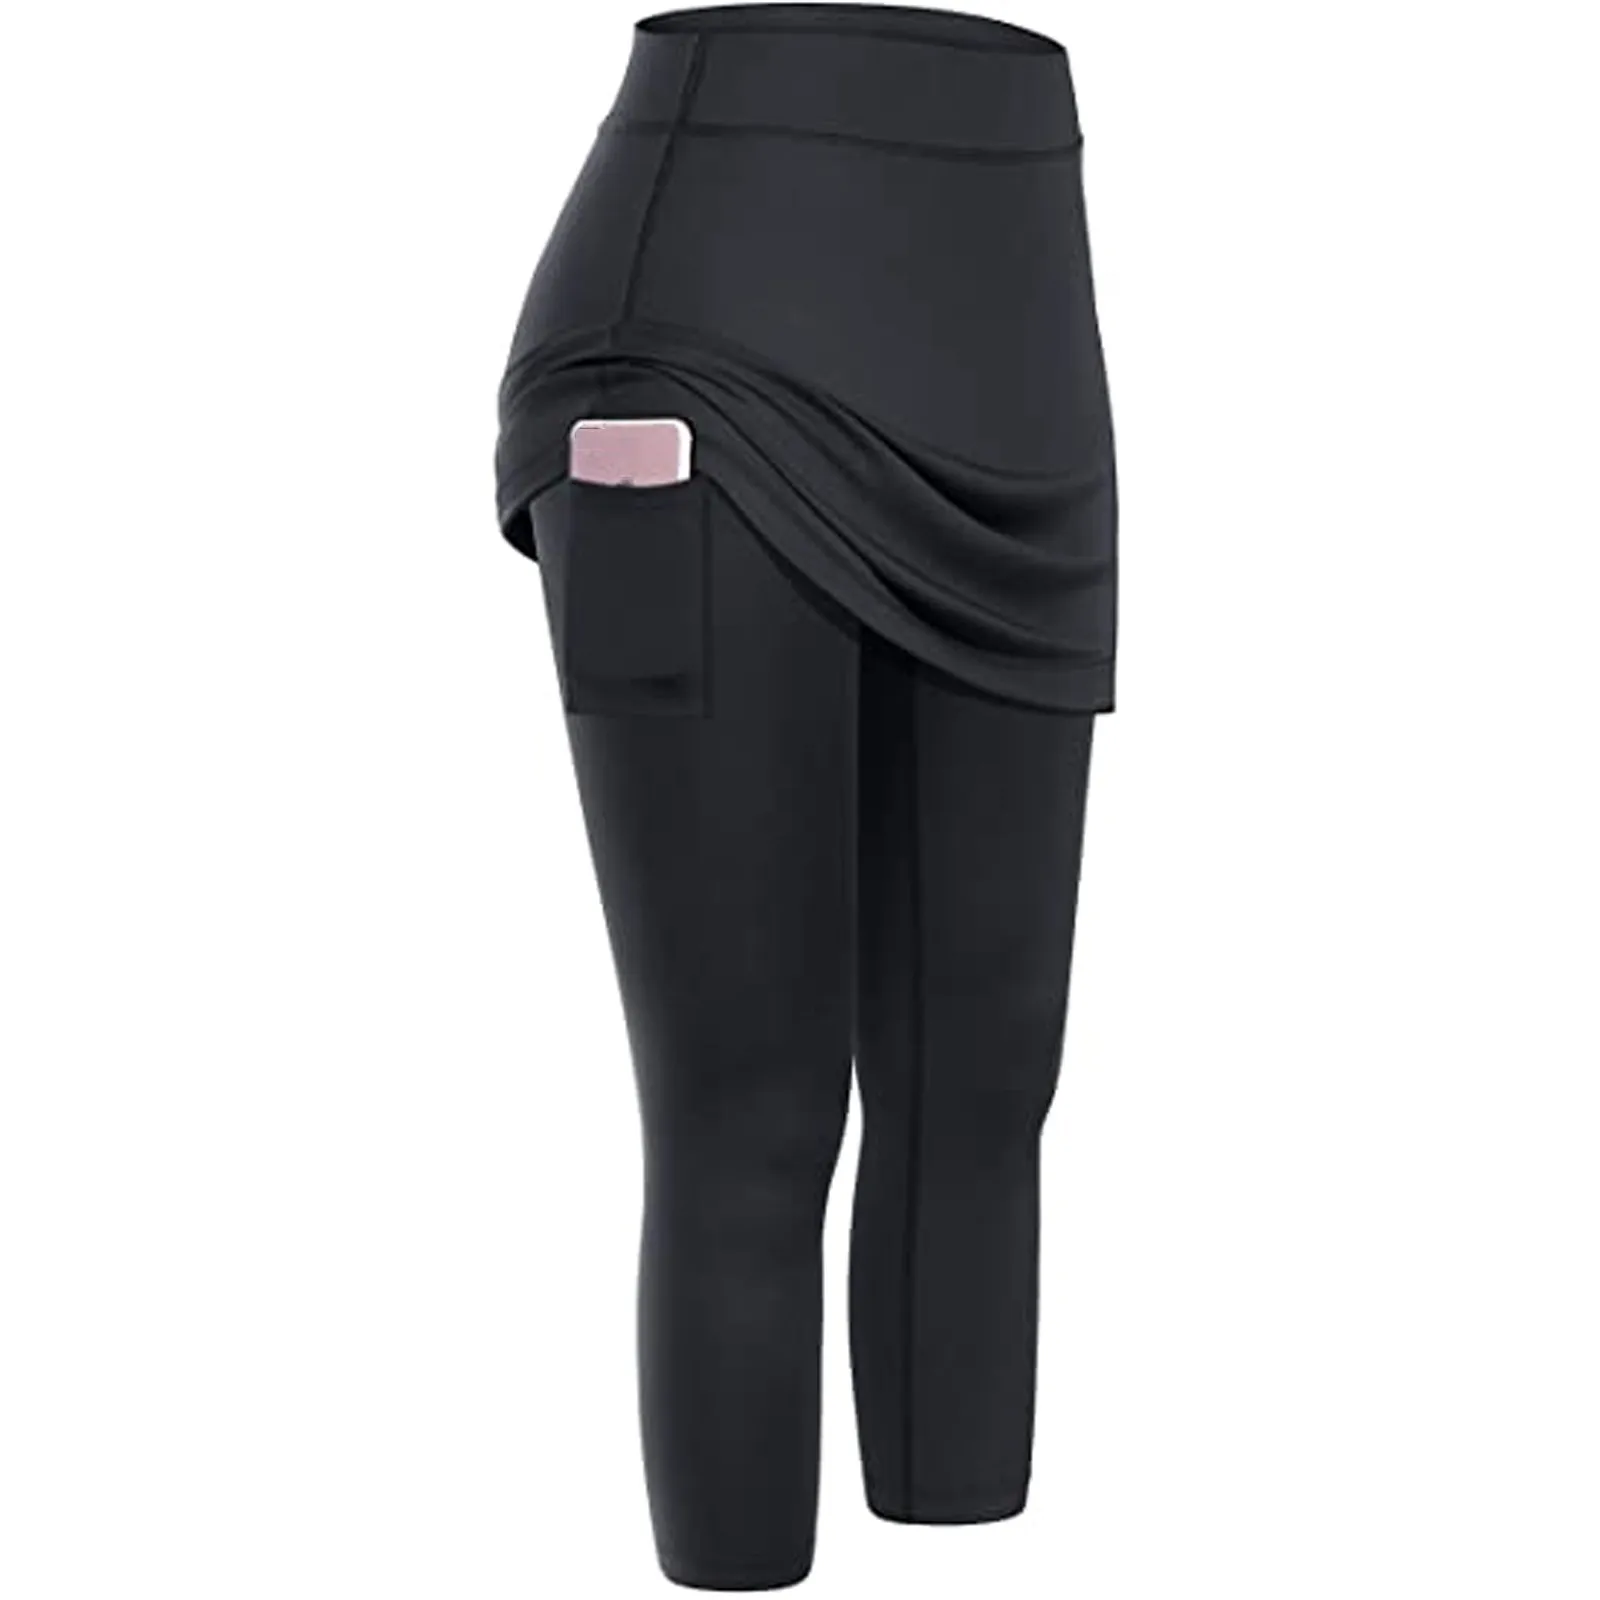 

Sports Leggings Women Tennis Skirted Capris With Pockets Elastic Sports Trousers Female Solid Butt Lifting Homewear Bottoms